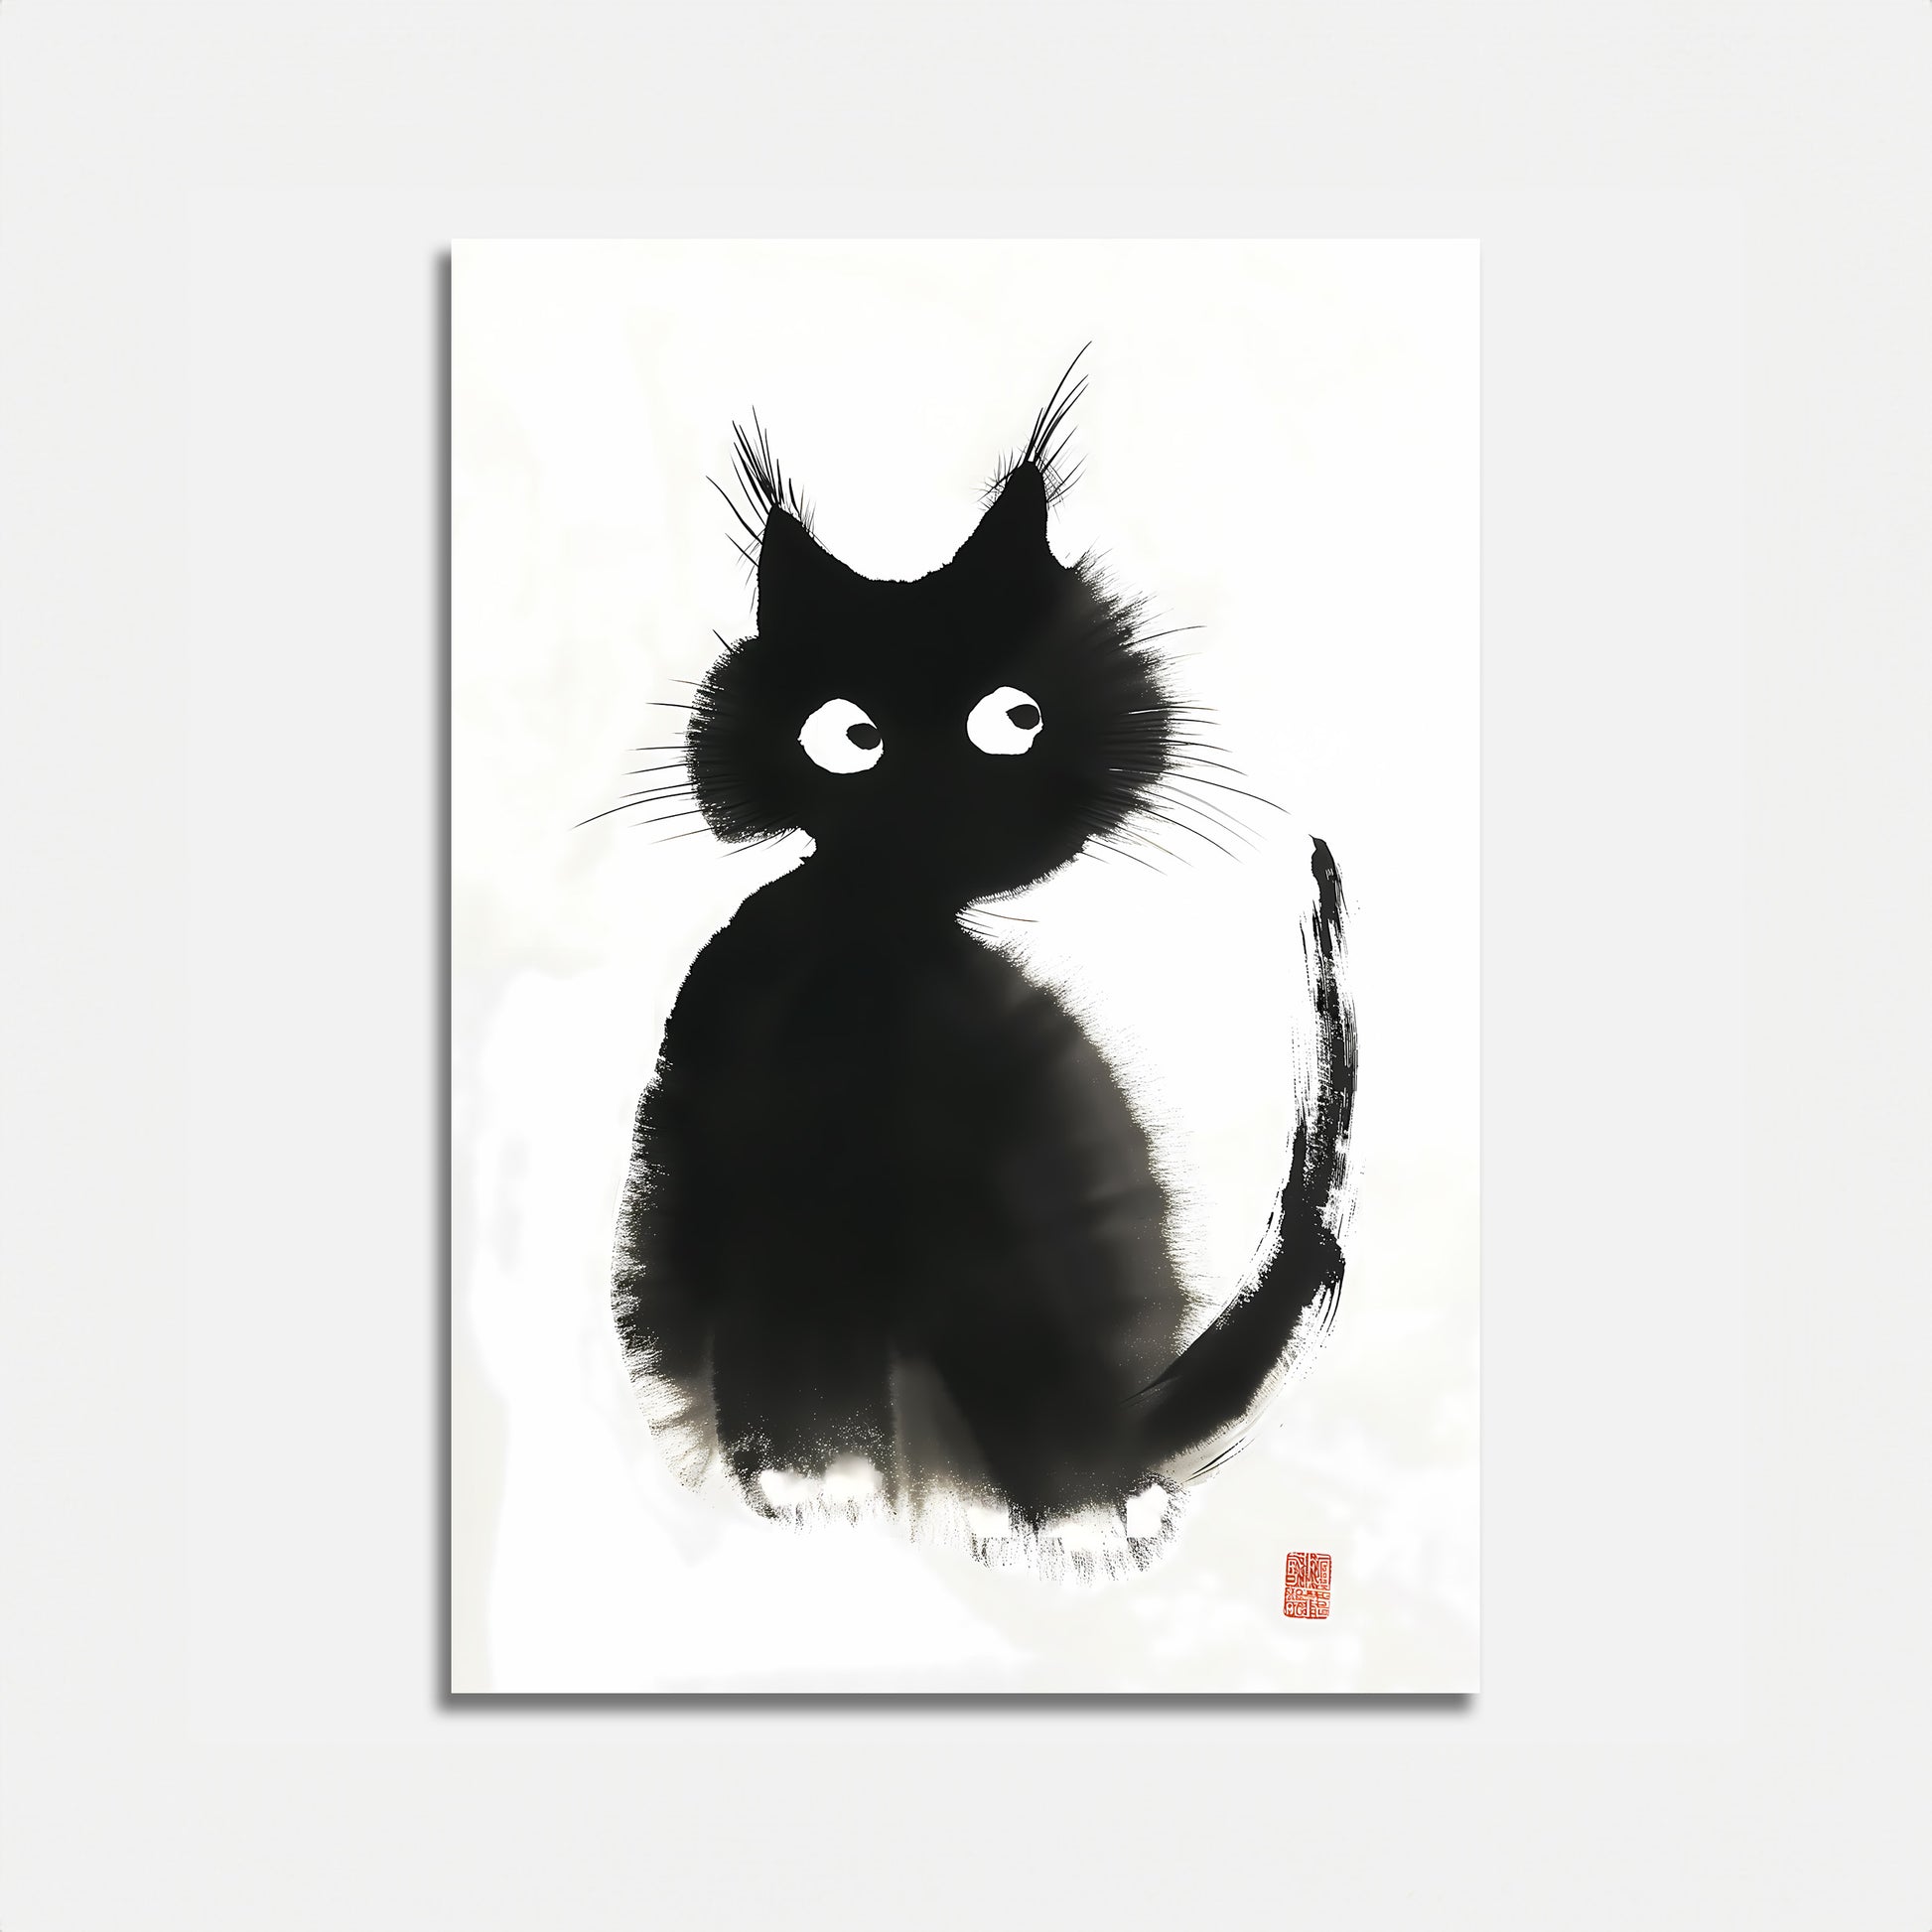 Illustration of a stylized black cat with large eyes on a white background.